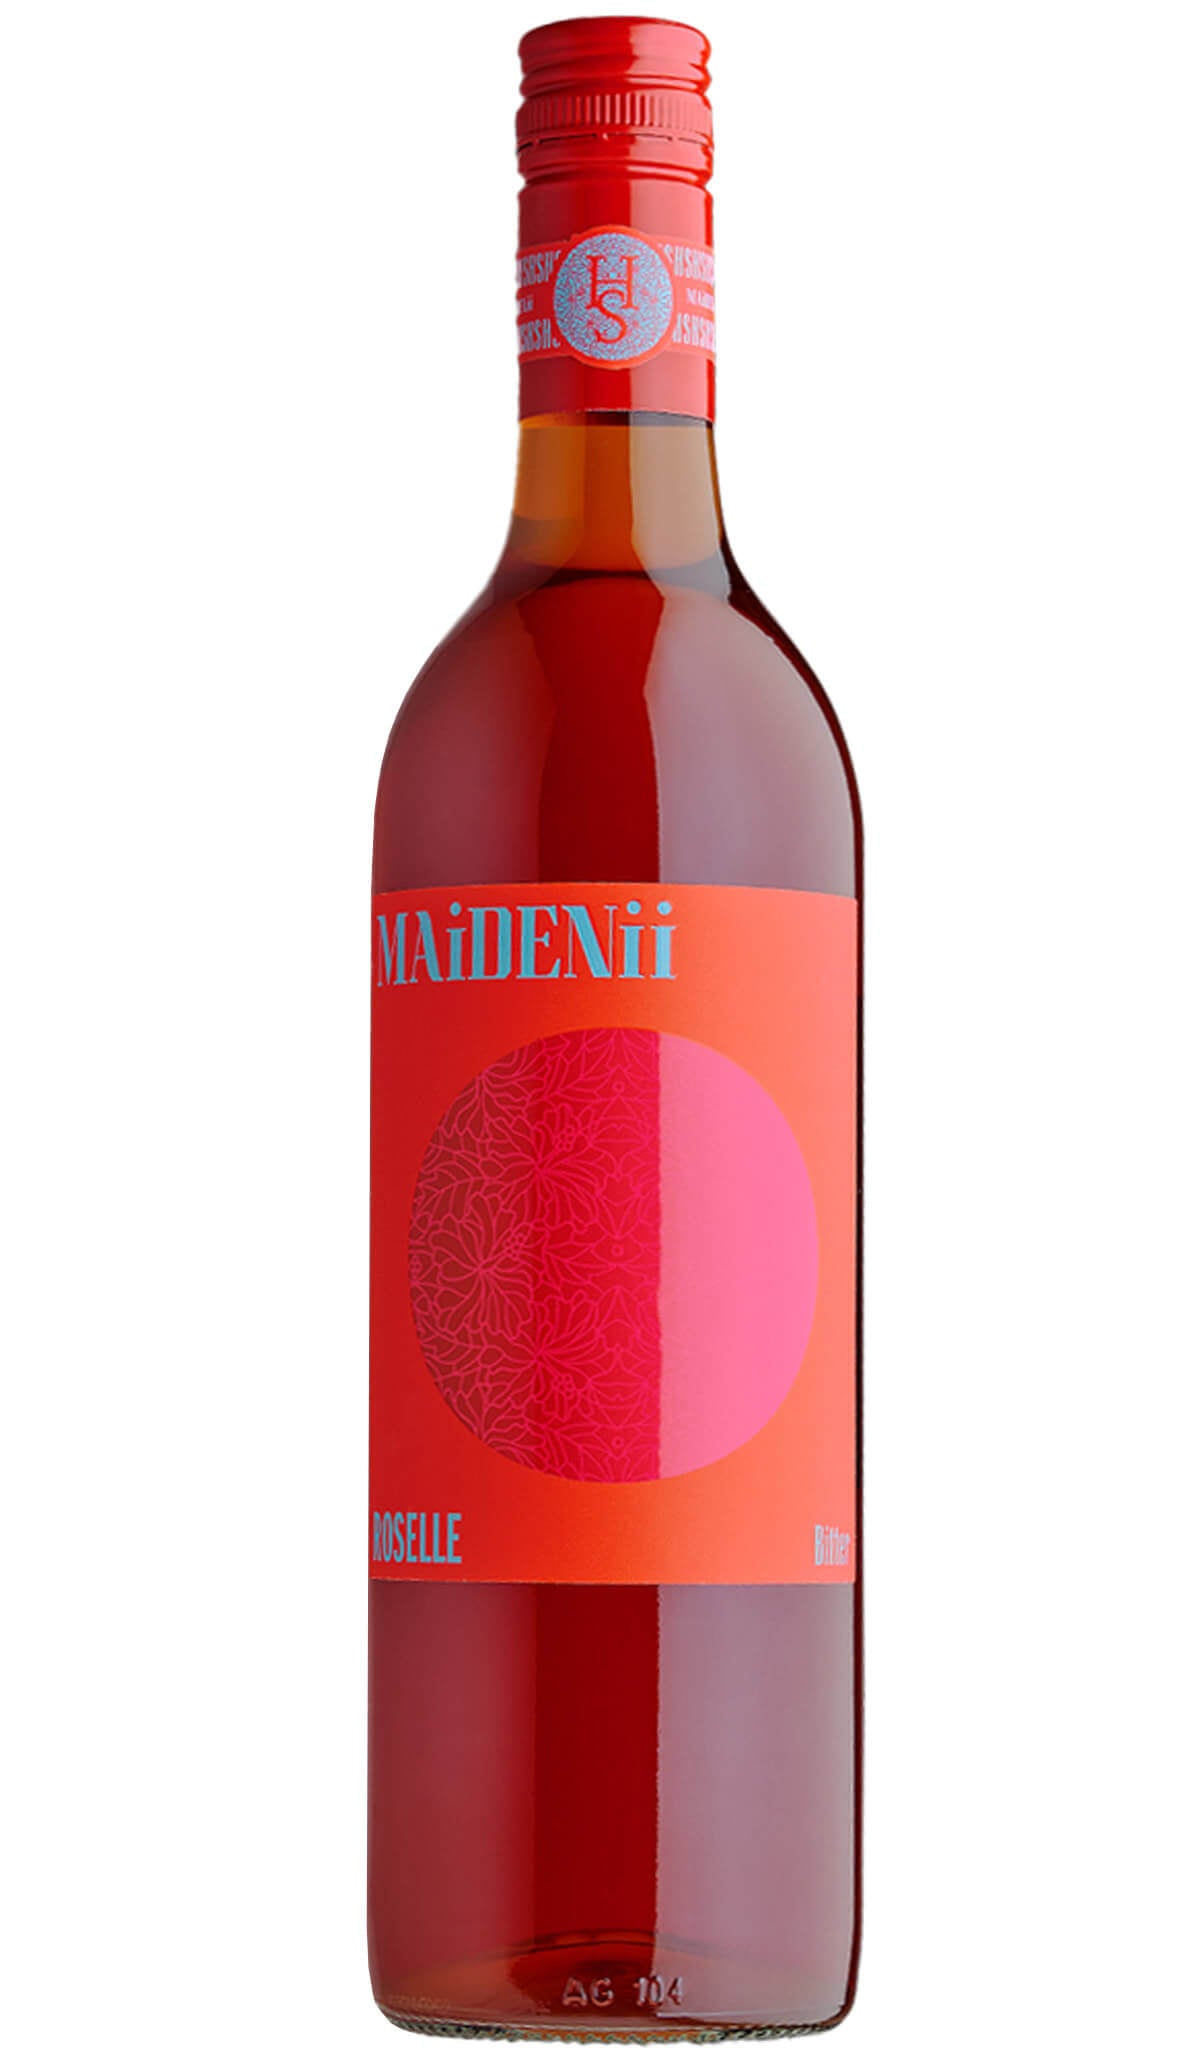 Find out more, explore the range and purchase Maidenii Roselle Bitter 750mL available online at Wine Sellers Direct - Australia's independent liquor specialists.